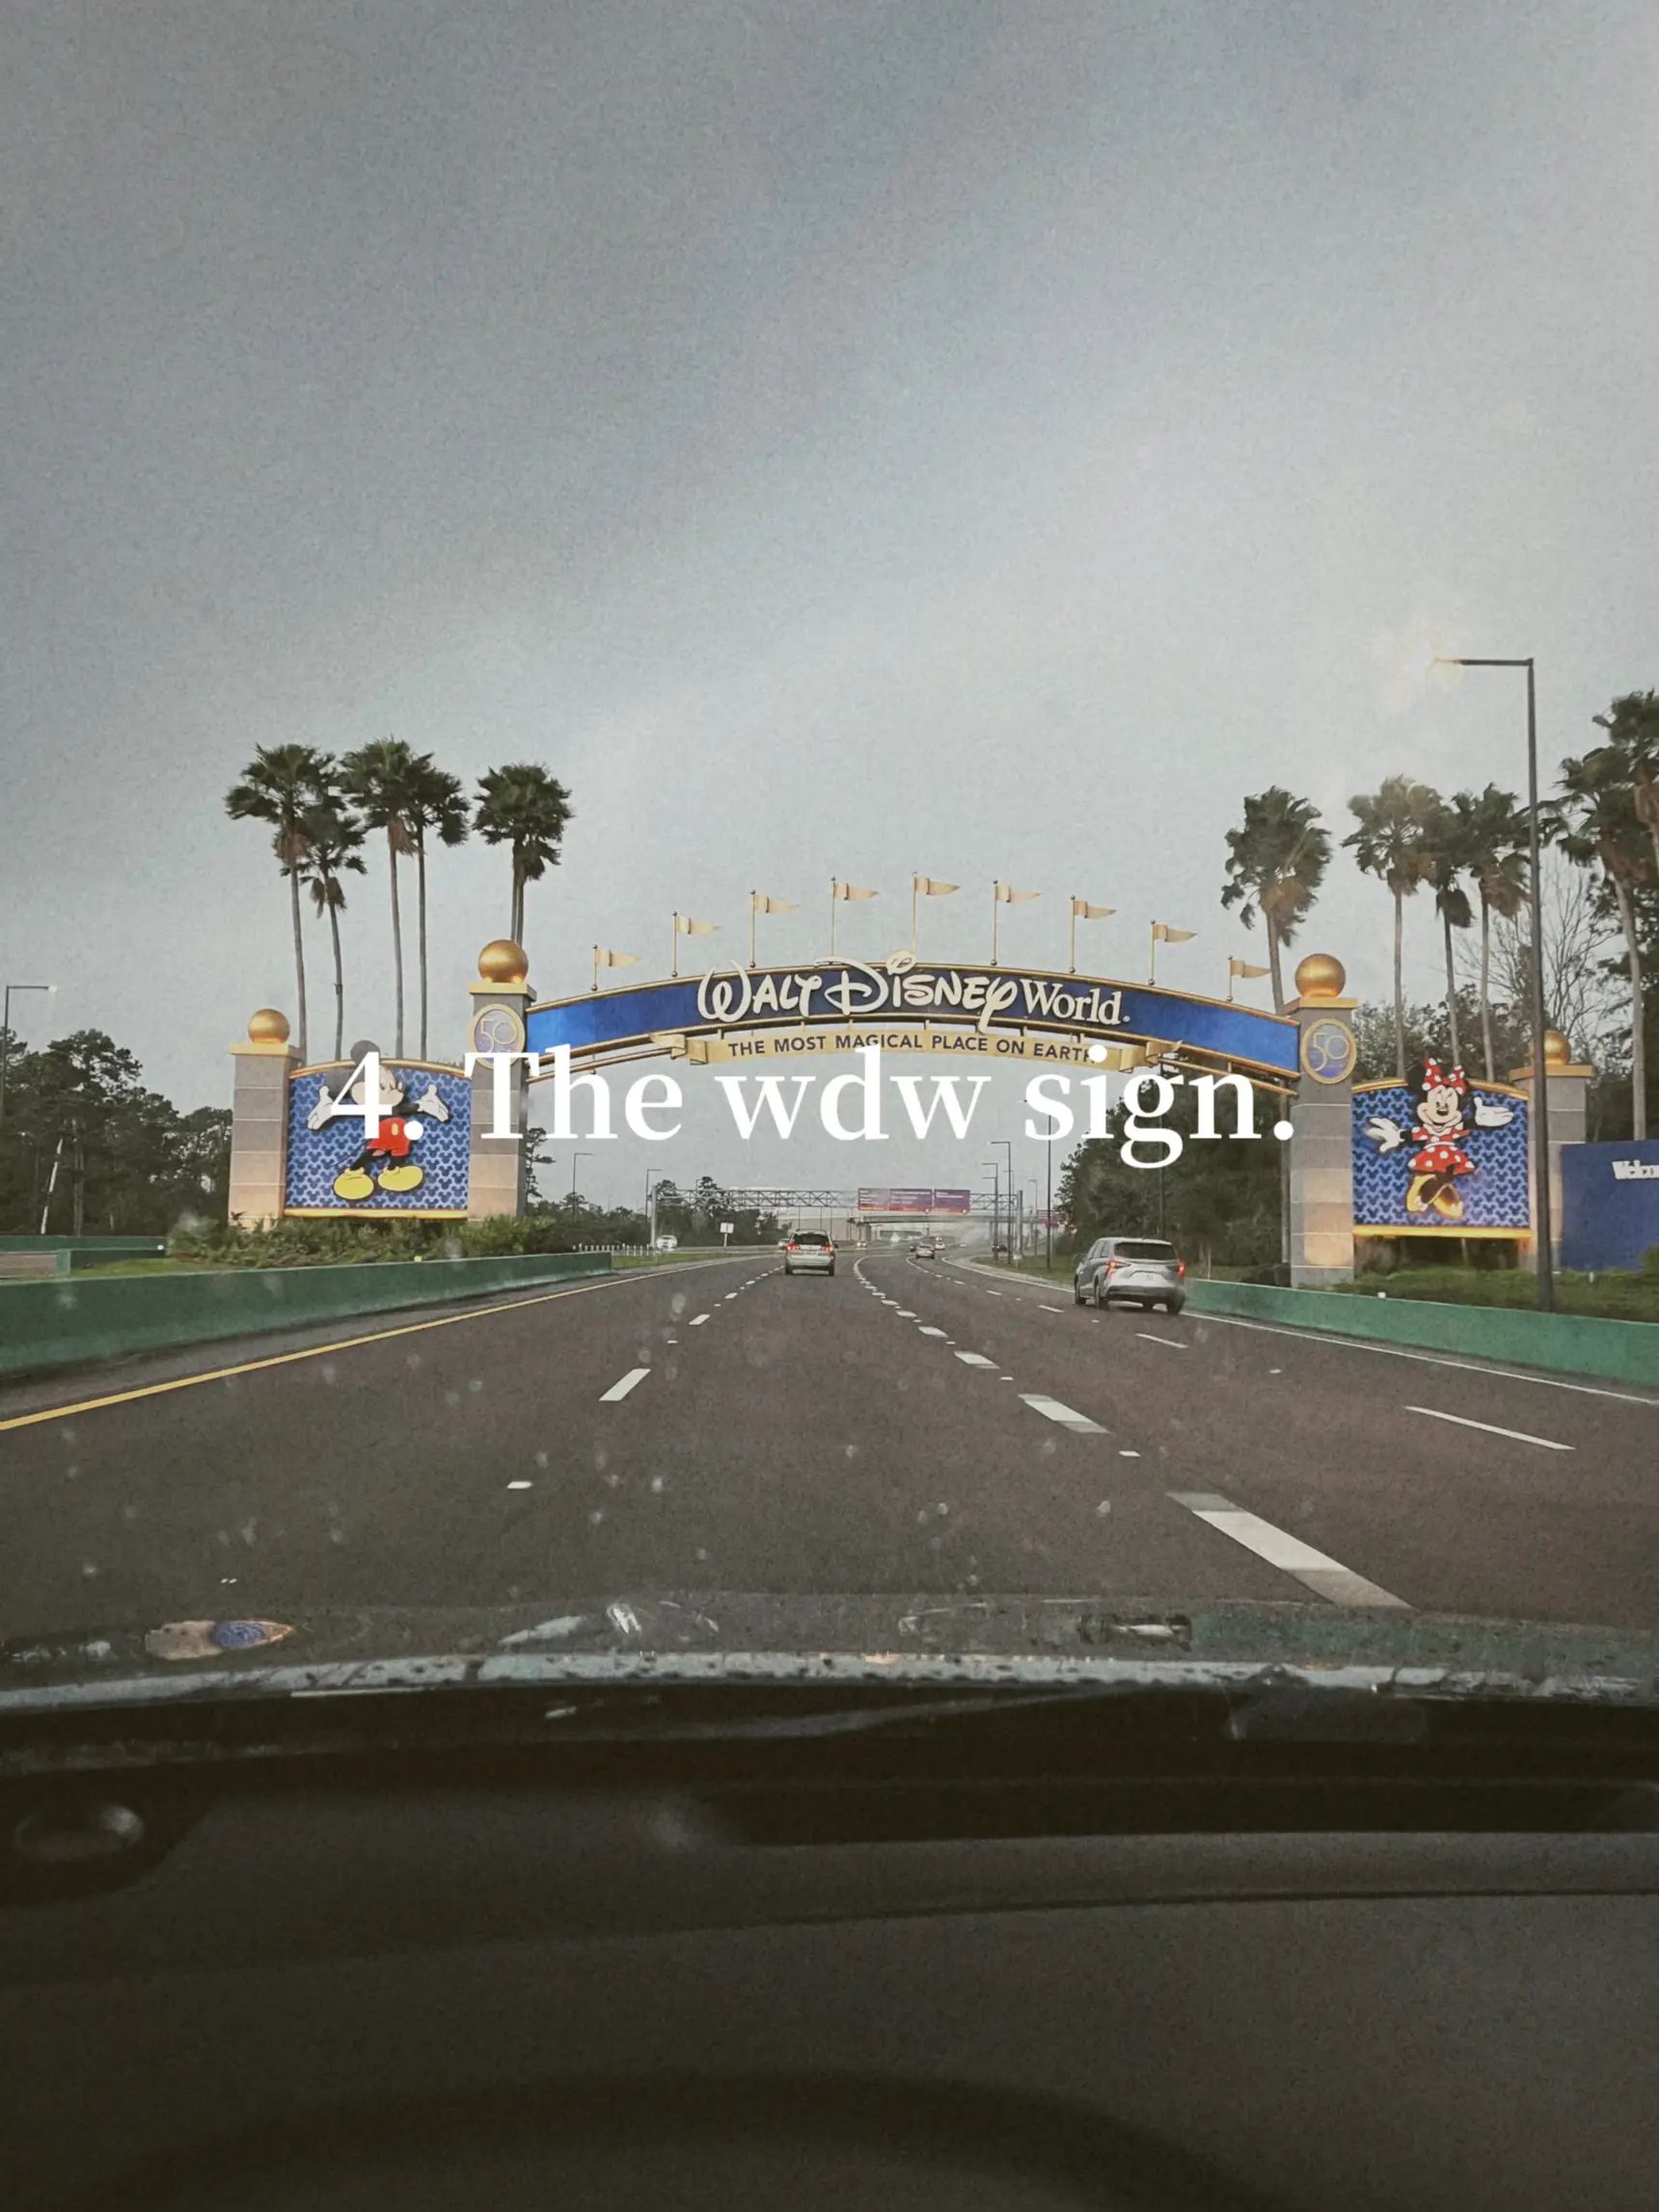  A car is driving down a highway with a sign that says "The wdw sign".